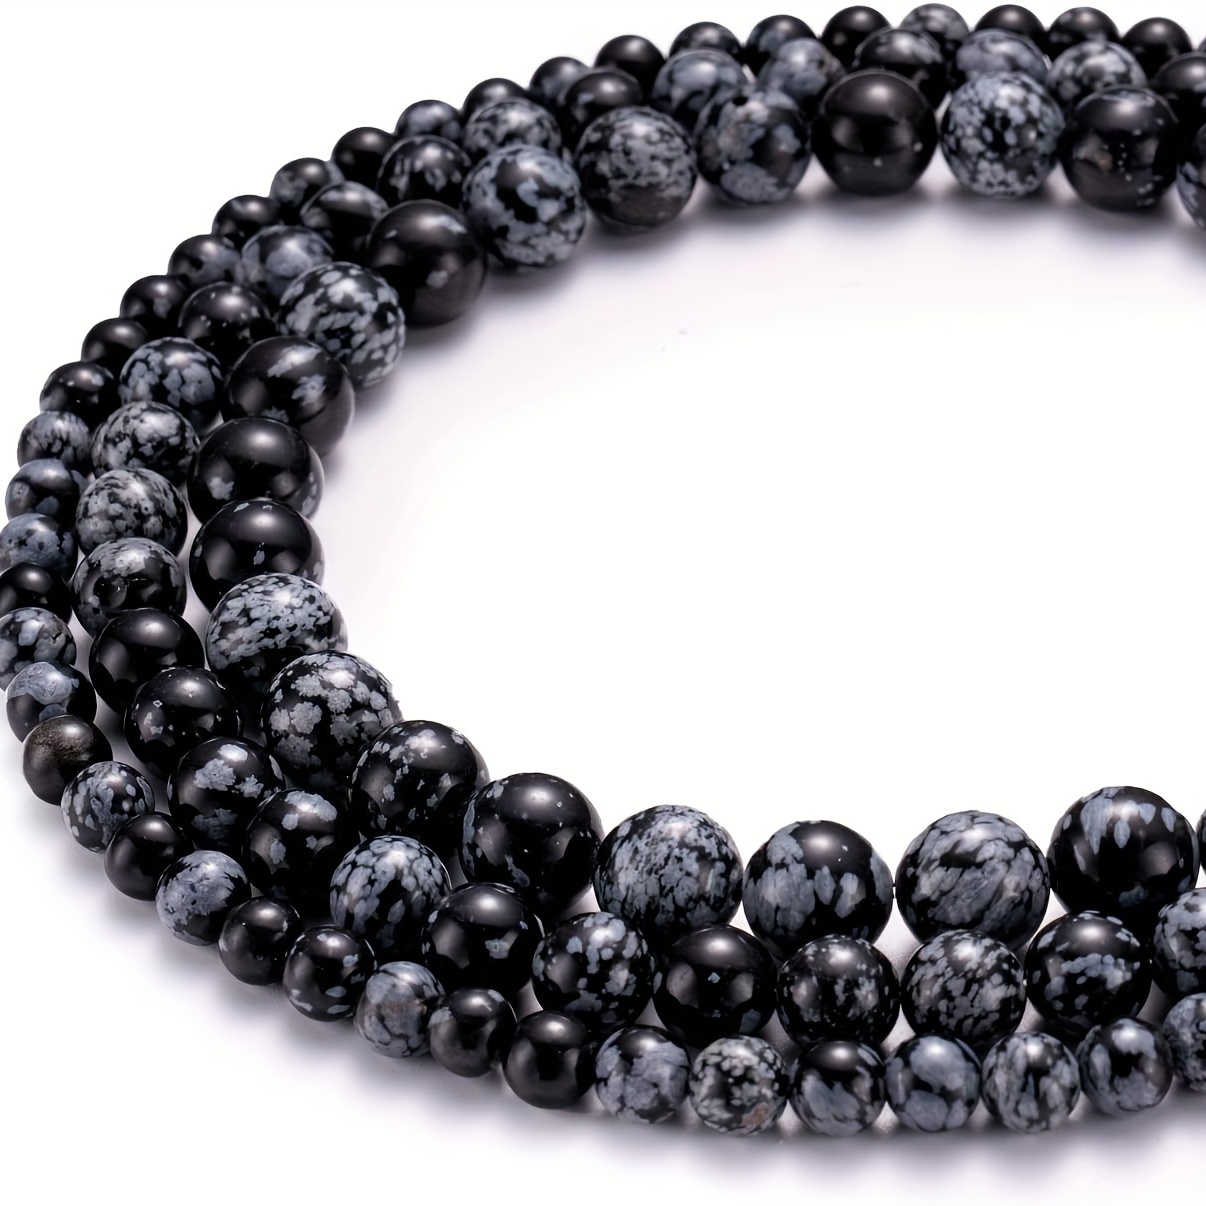 8mm Natural Black Obsidian Beads Round Gemstone Loose Beads for Jewelry  Making (45-48pcs/strand)